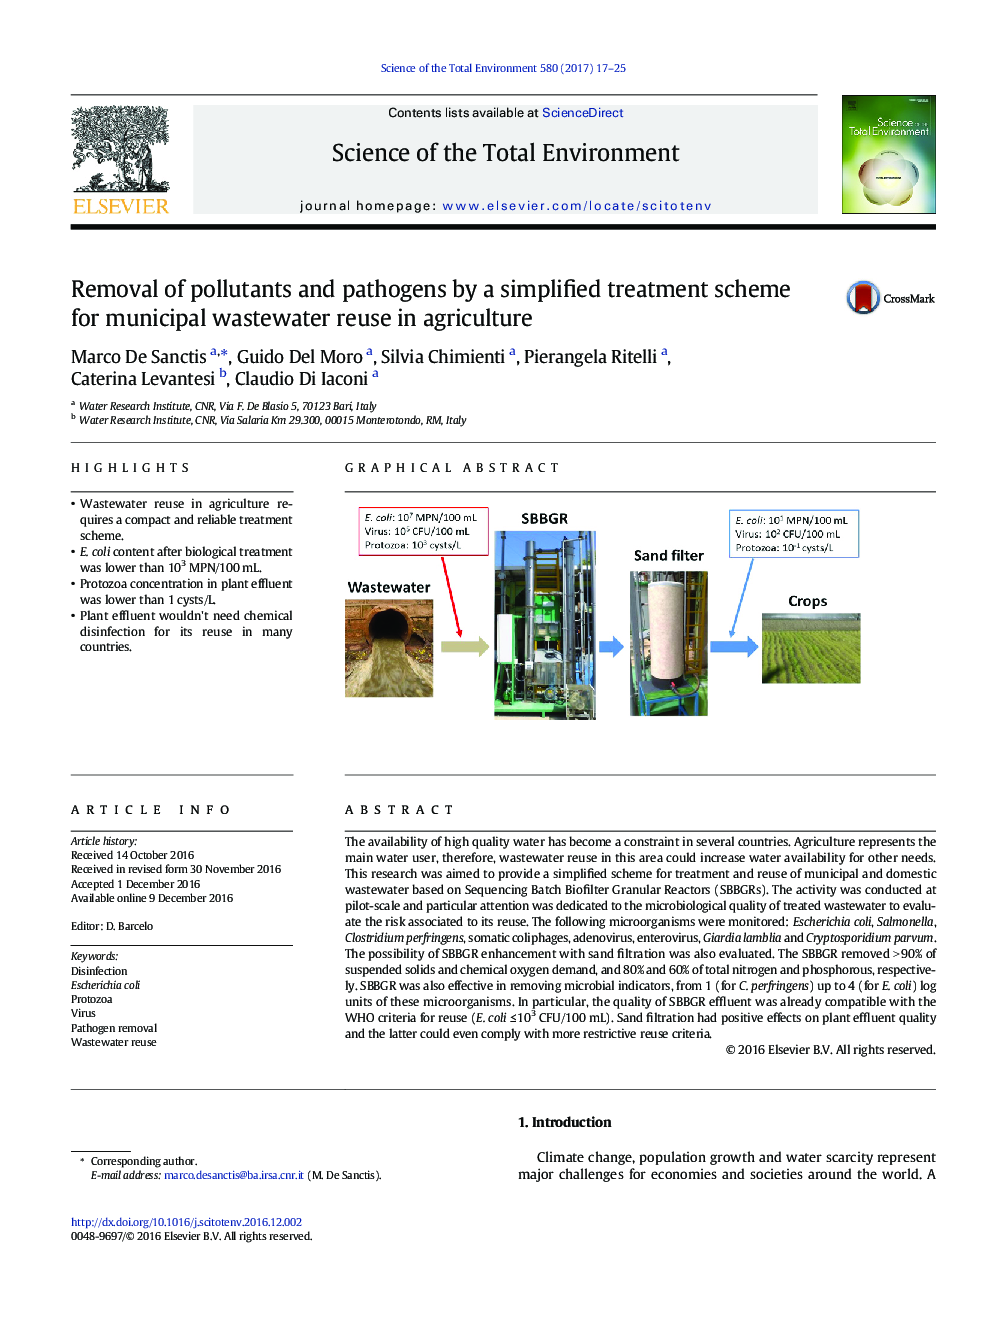 Removal of pollutants and pathogens by a simplified treatment scheme for municipal wastewater reuse in agriculture